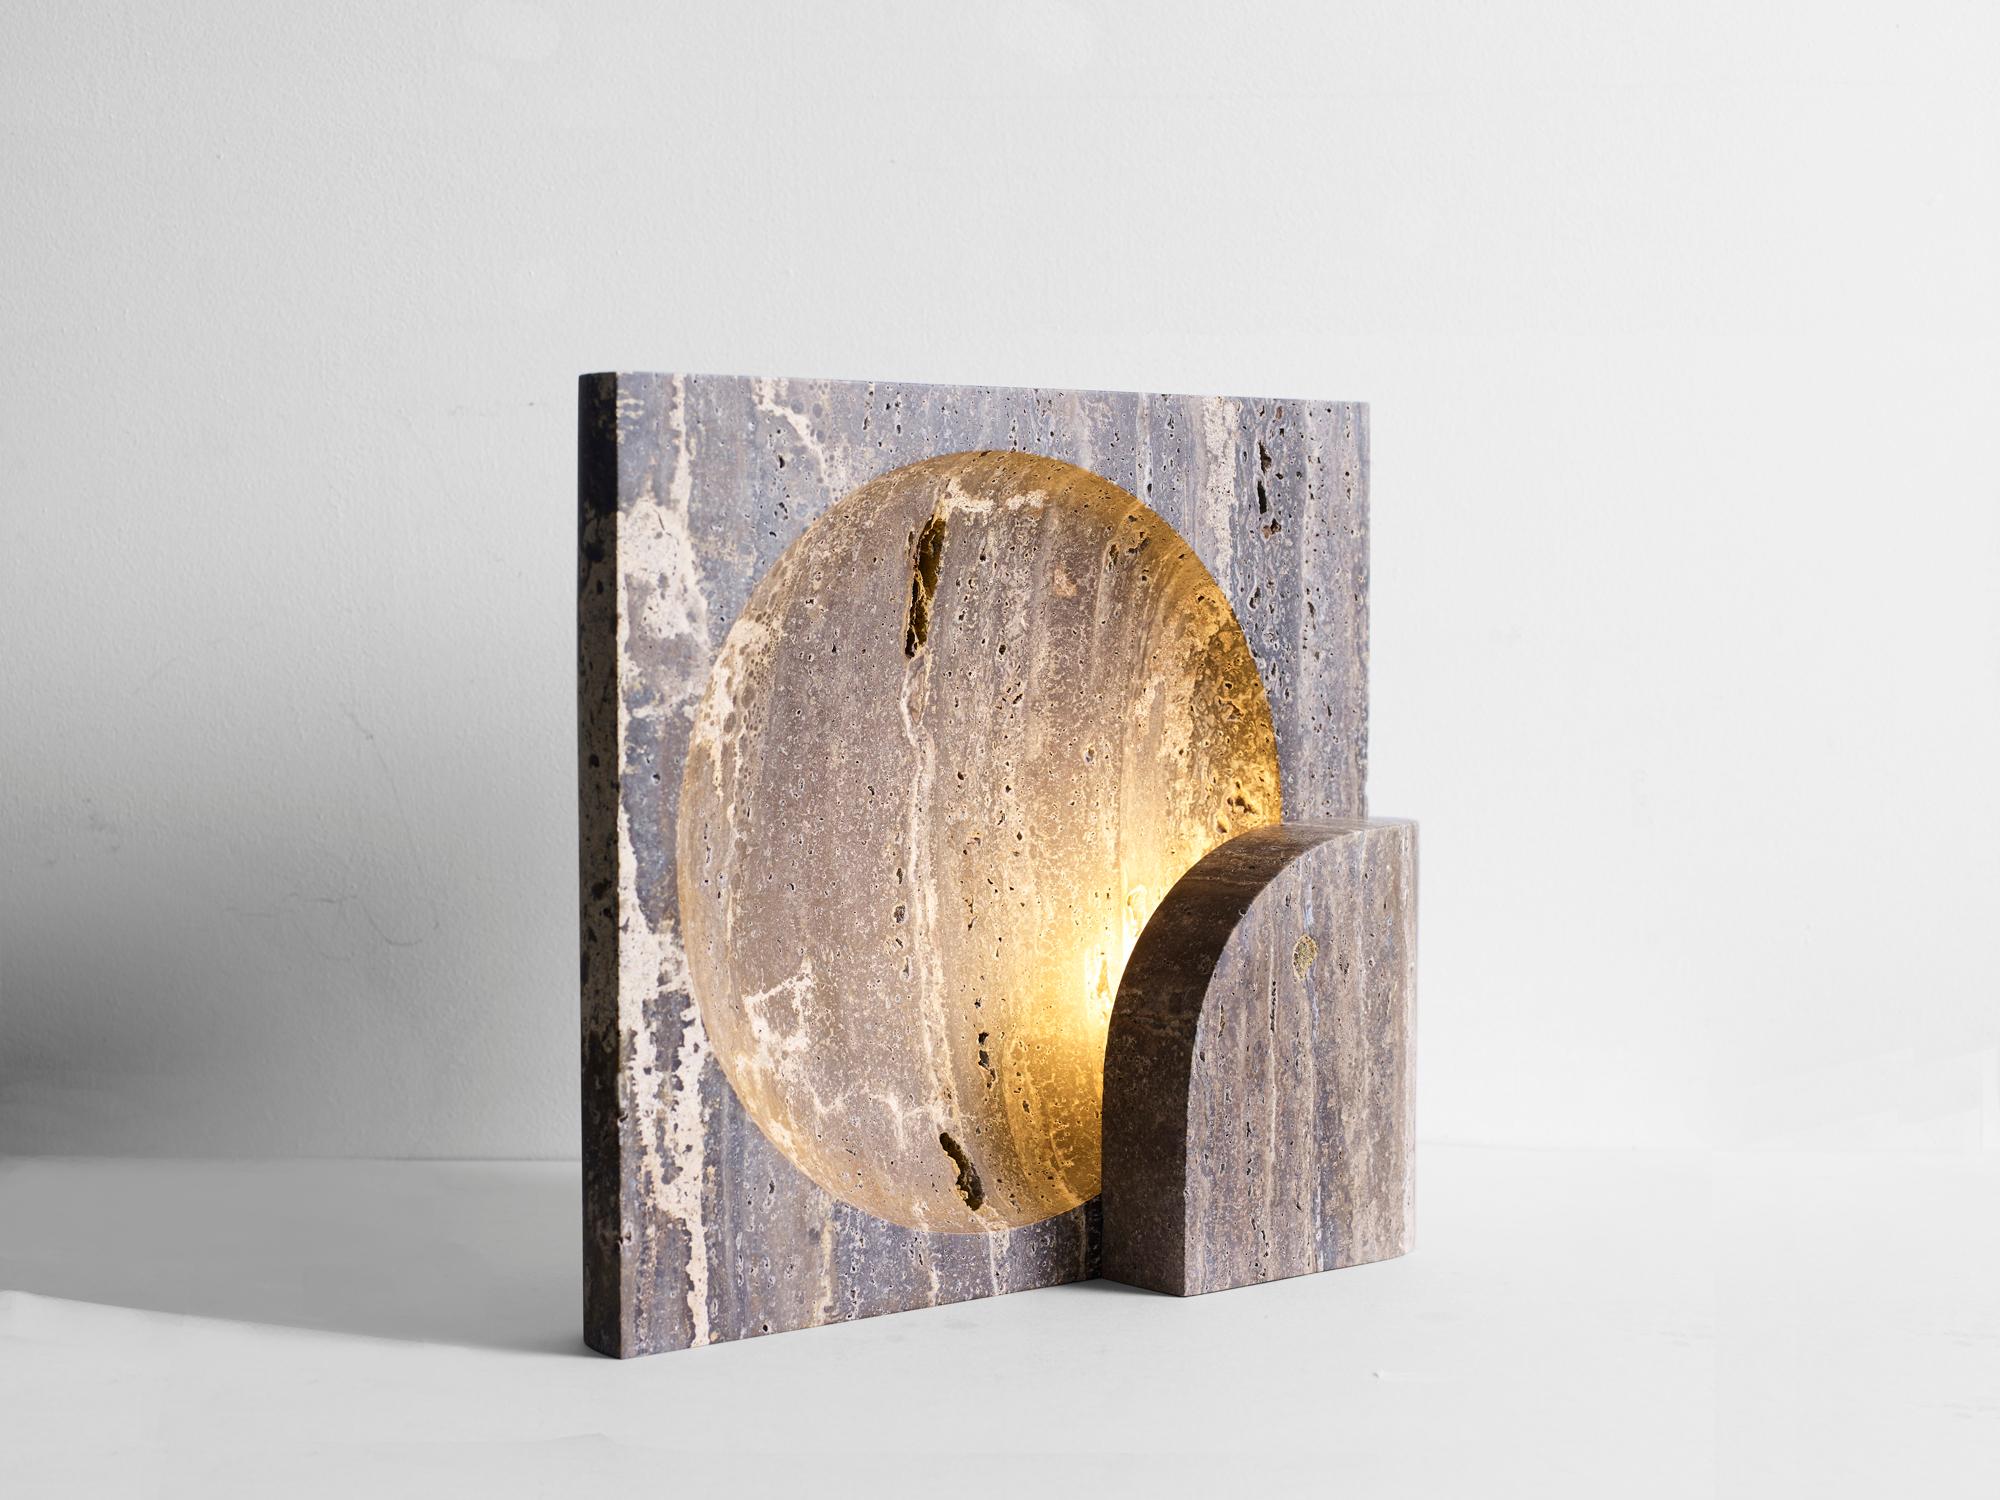 Black Travertine Block Sconce by Henry Wilson
Dimensions: W 35 x D 11 x H 35 cm
Materials: Black Travertine

This sculptural item is handmade in Sydney, Australia.

This block table lamp is an ambient, sculptural light carved in two halves from